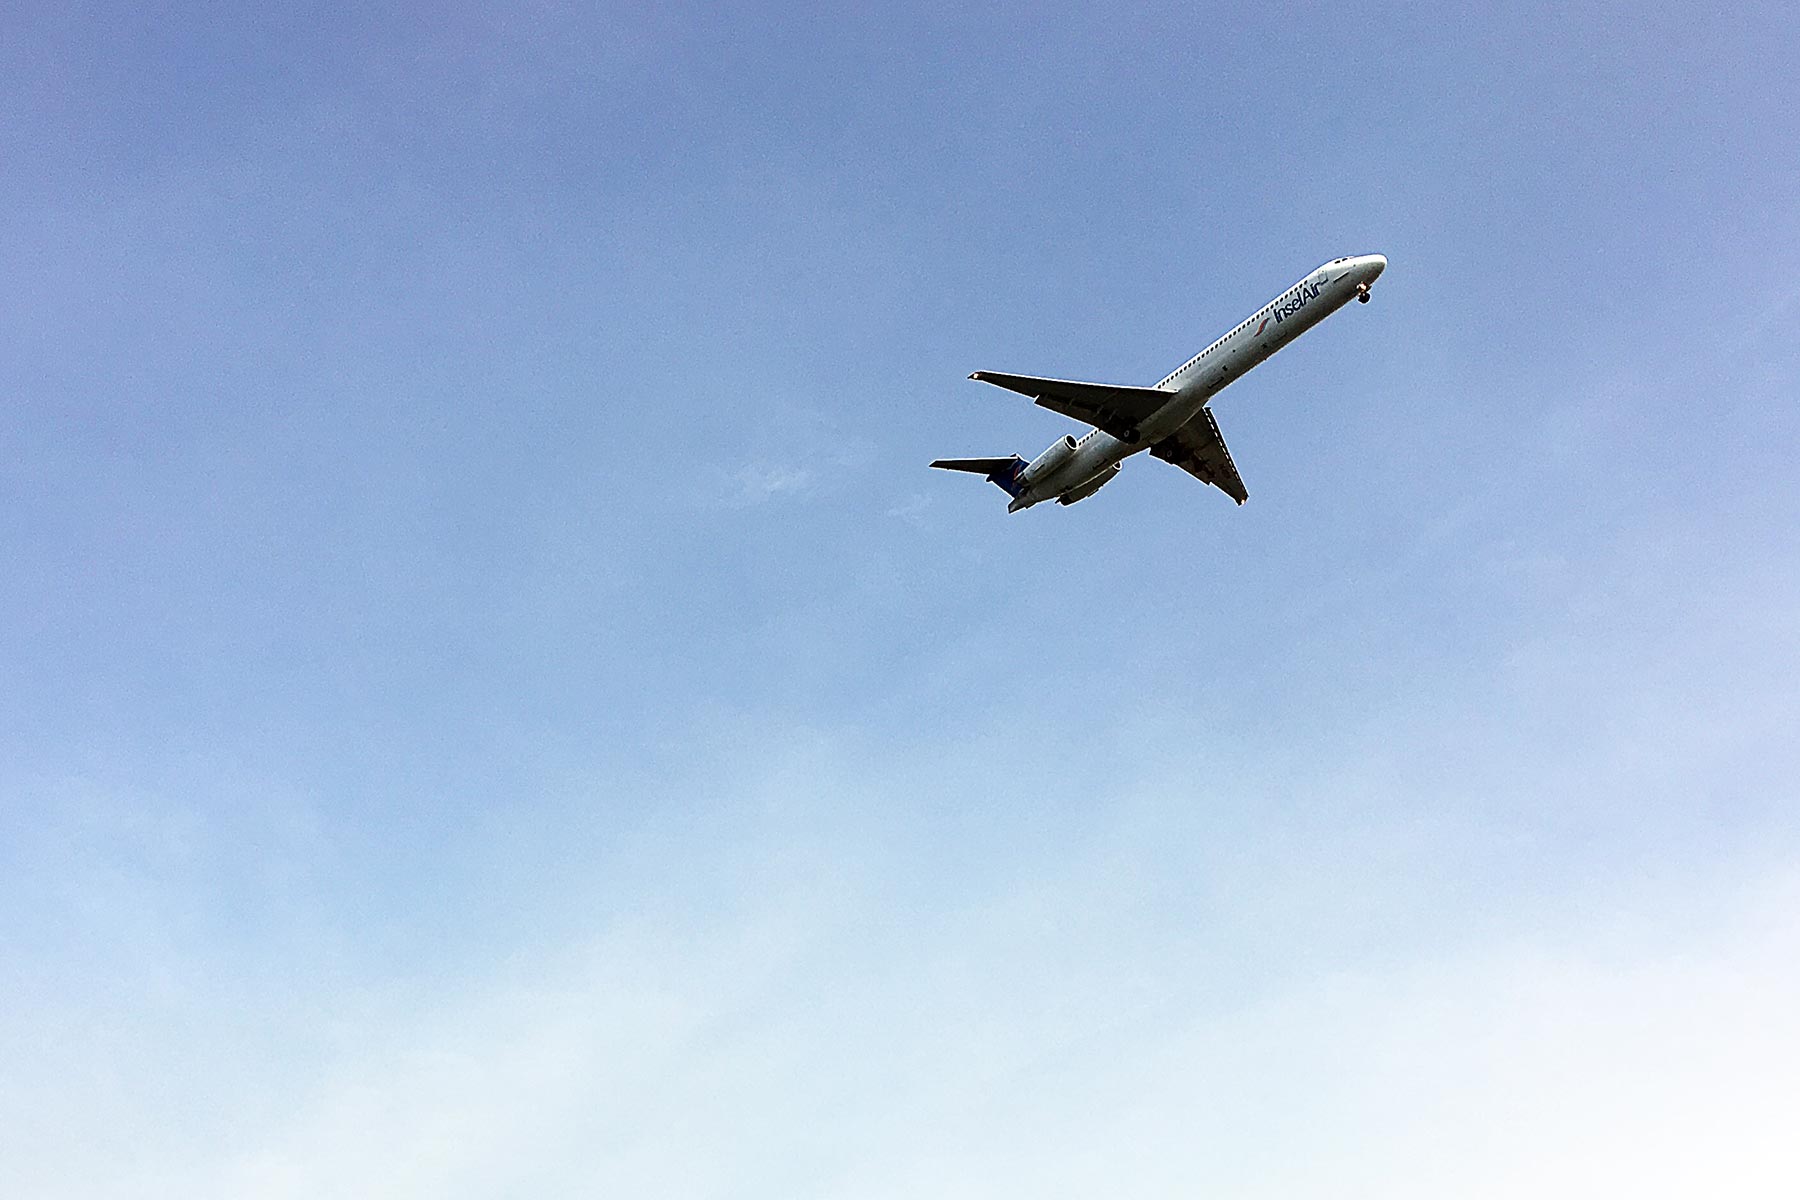 A plane flying in the blue sky